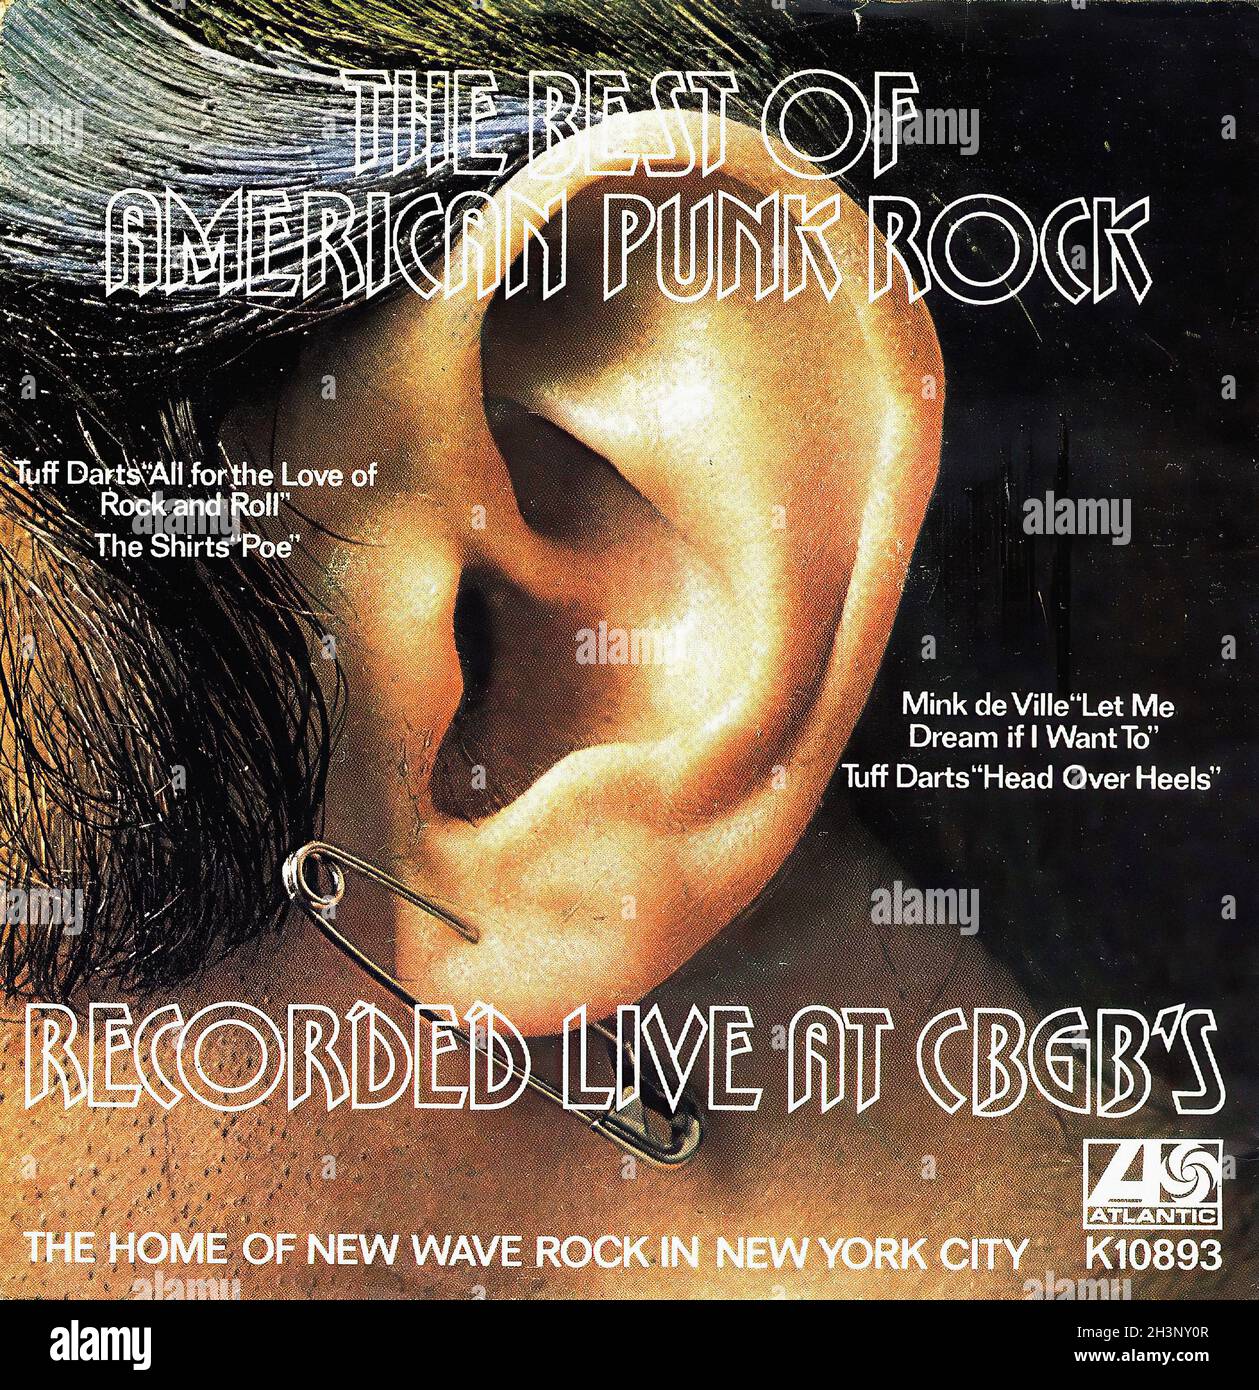 Vintage Vinyl Recording - Various - The Best Of American Punk Rock - Recorded Live At CBGB'S - UK - 1977 Stock Photo